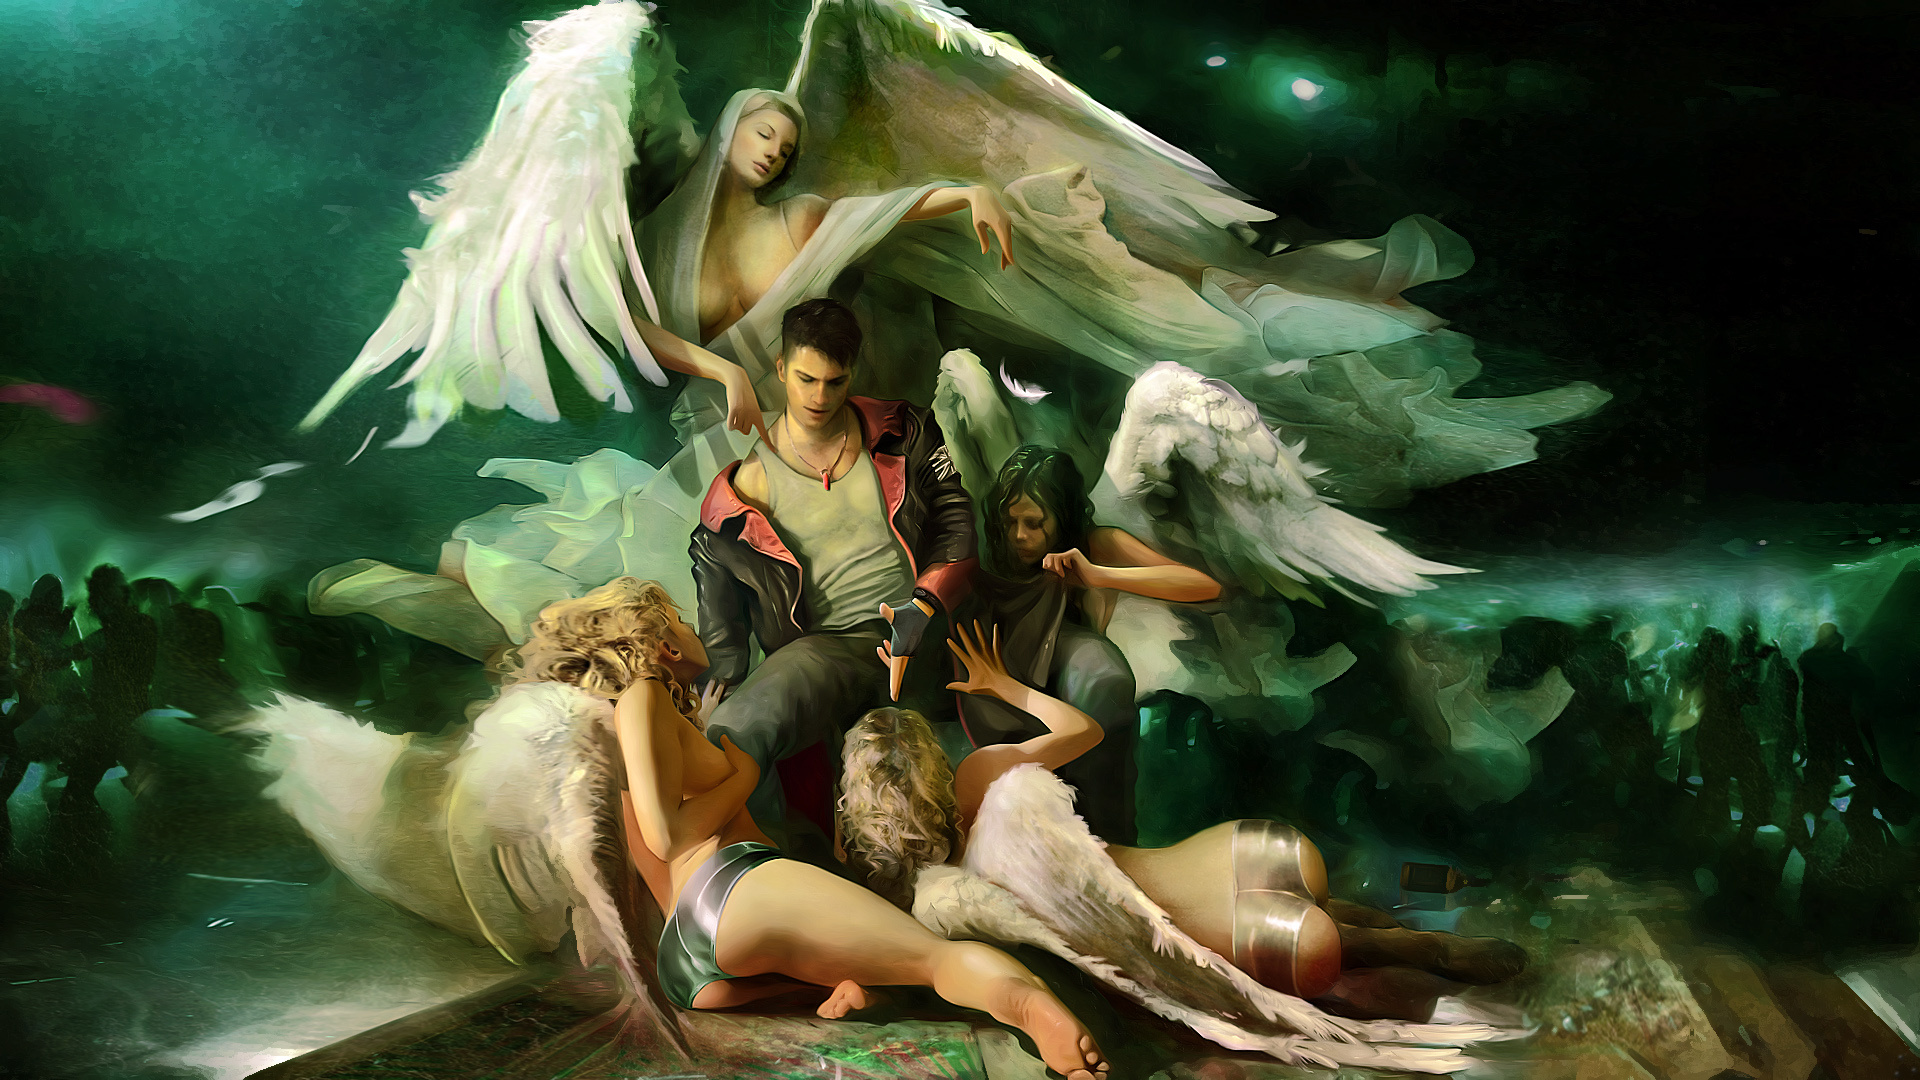 devil may cry wallpapers hd 1080pjpg 1920x1080